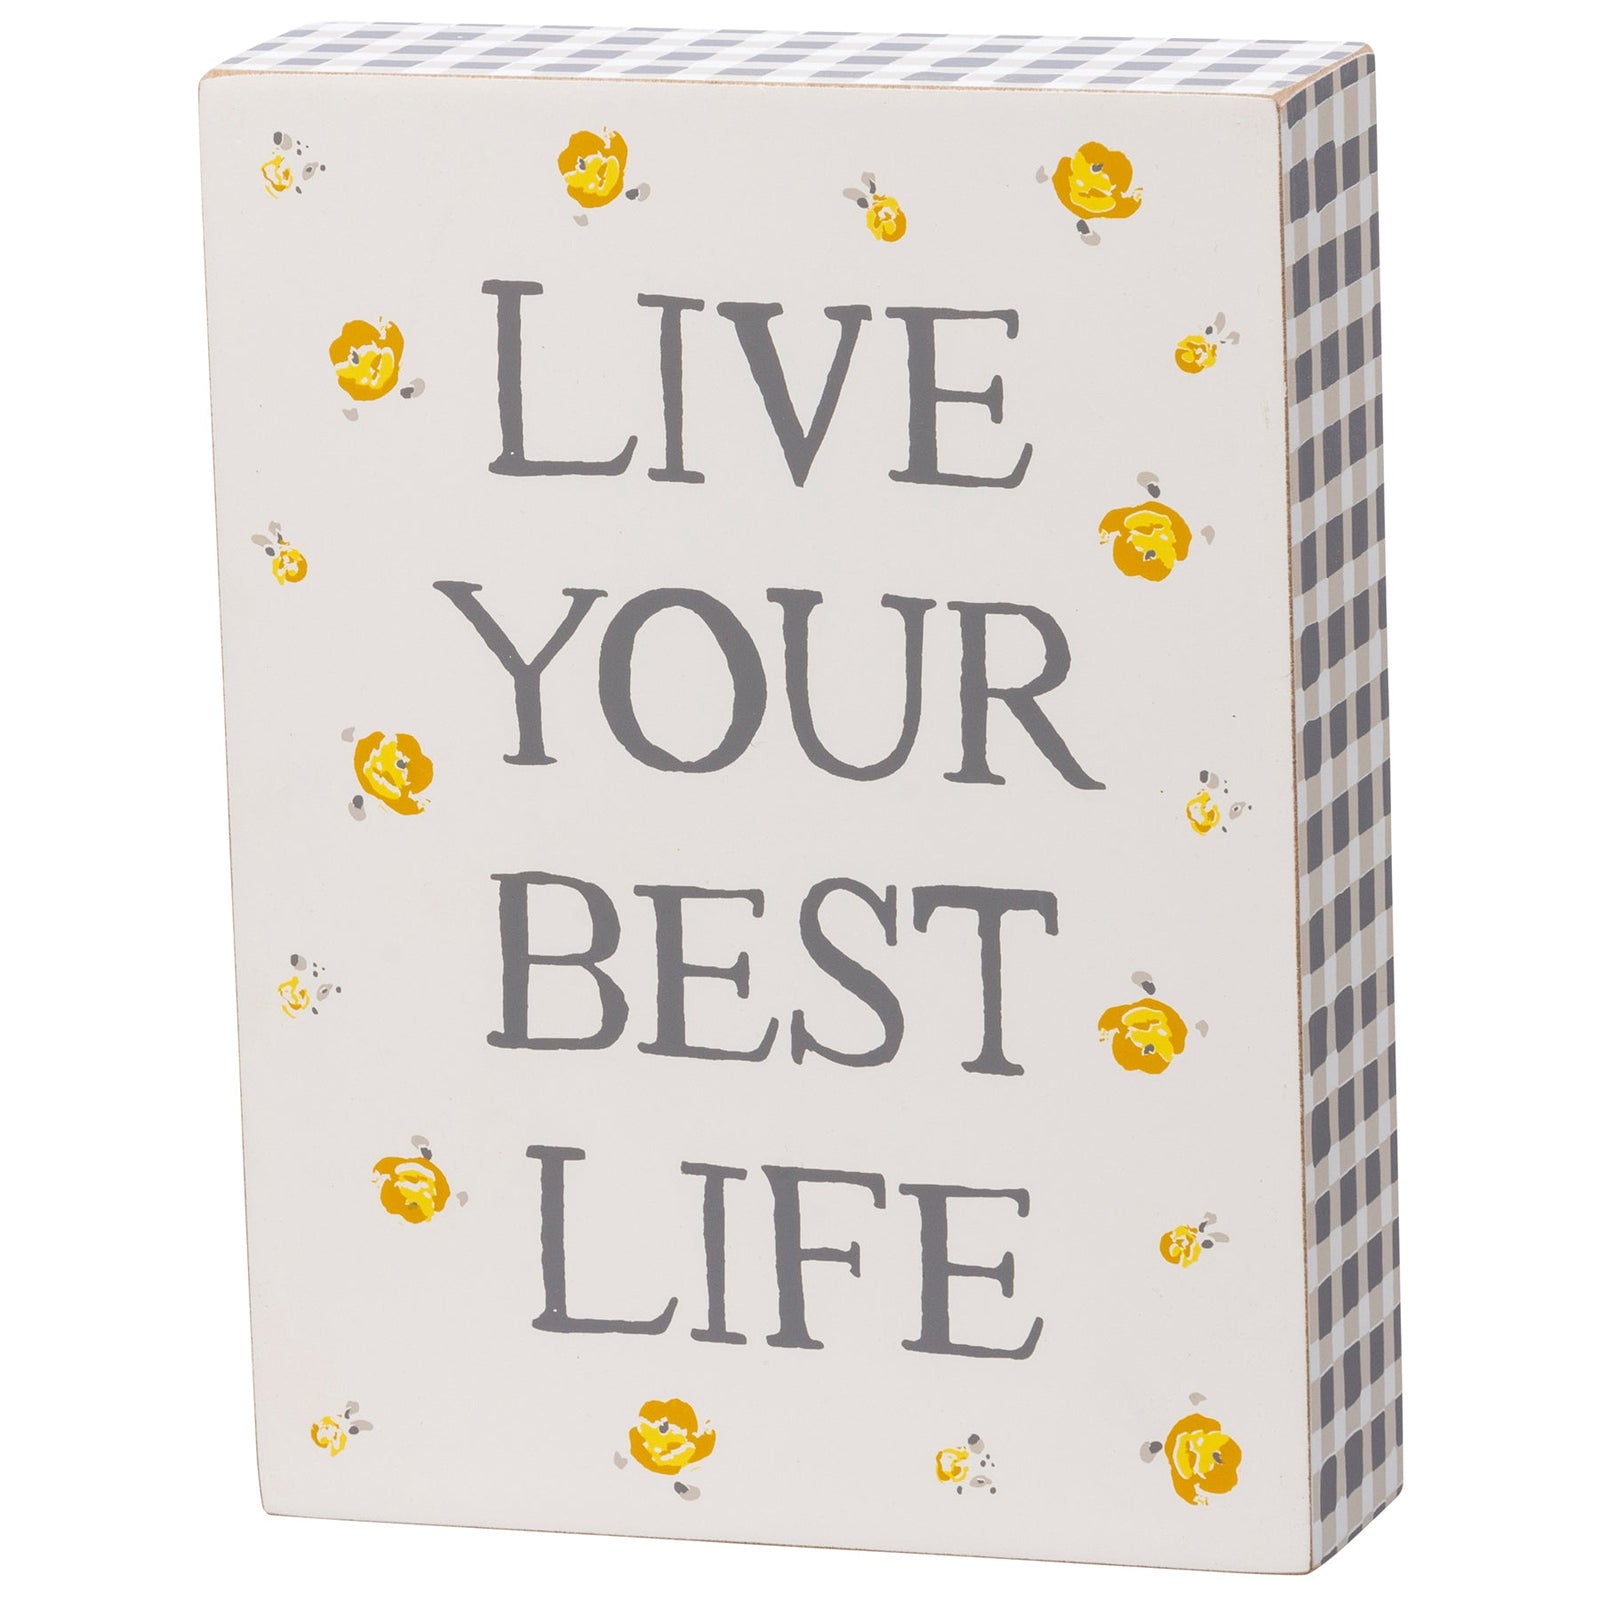 Live Your Best Life Watercolor Box Sign | Motivational Quote Wooden Sign Decor Display | 6" x 8"